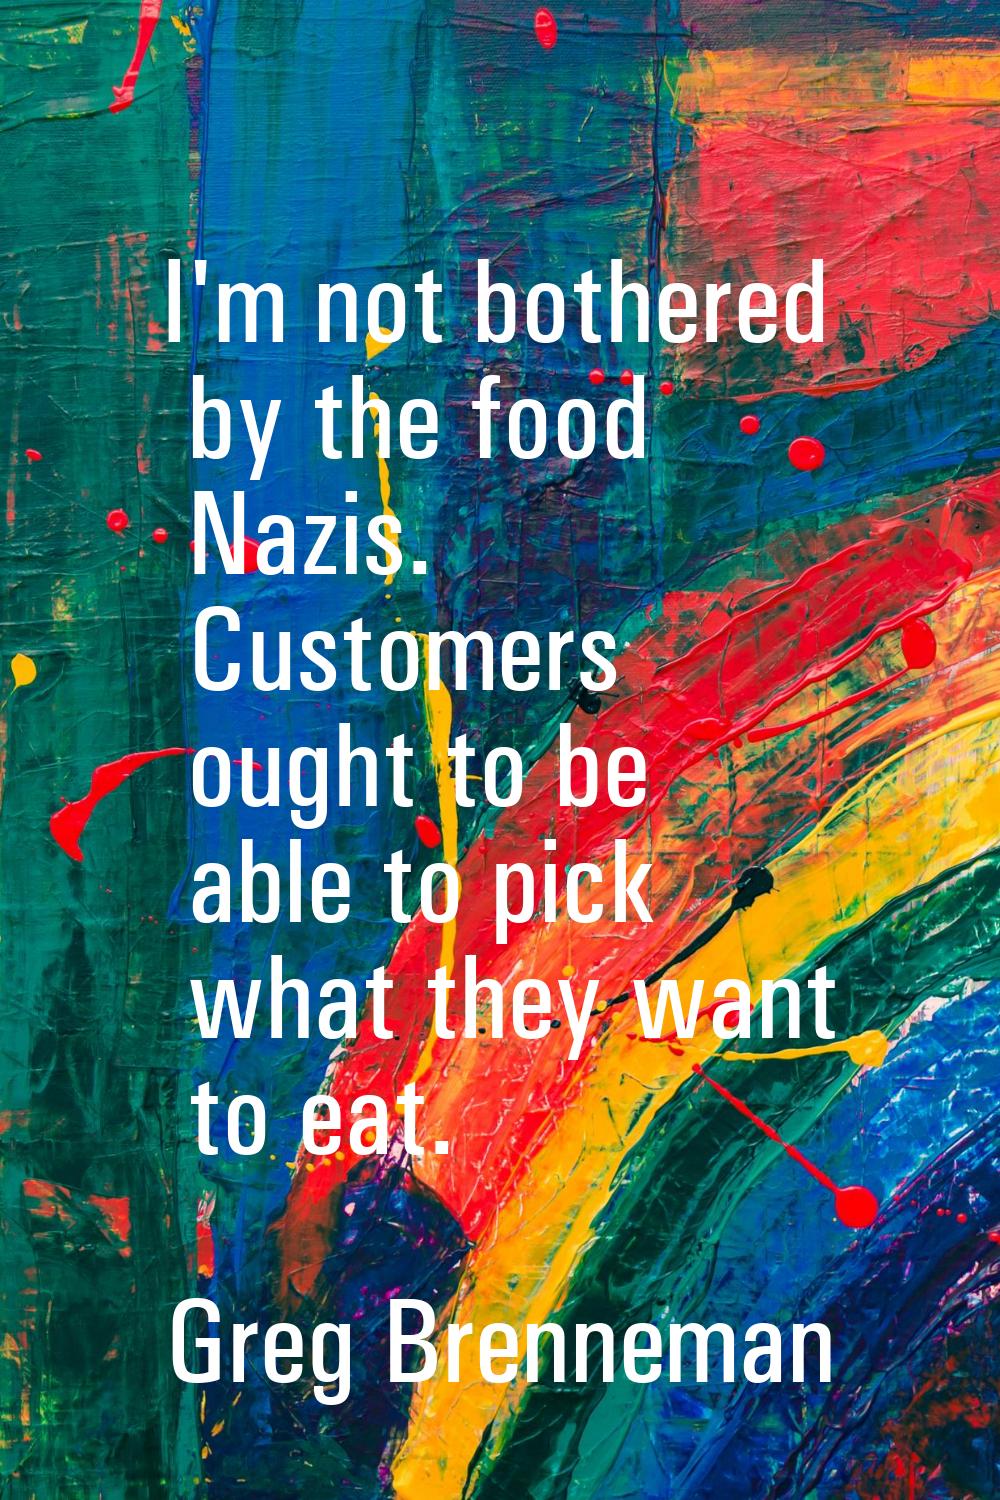 I'm not bothered by the food Nazis. Customers ought to be able to pick what they want to eat.